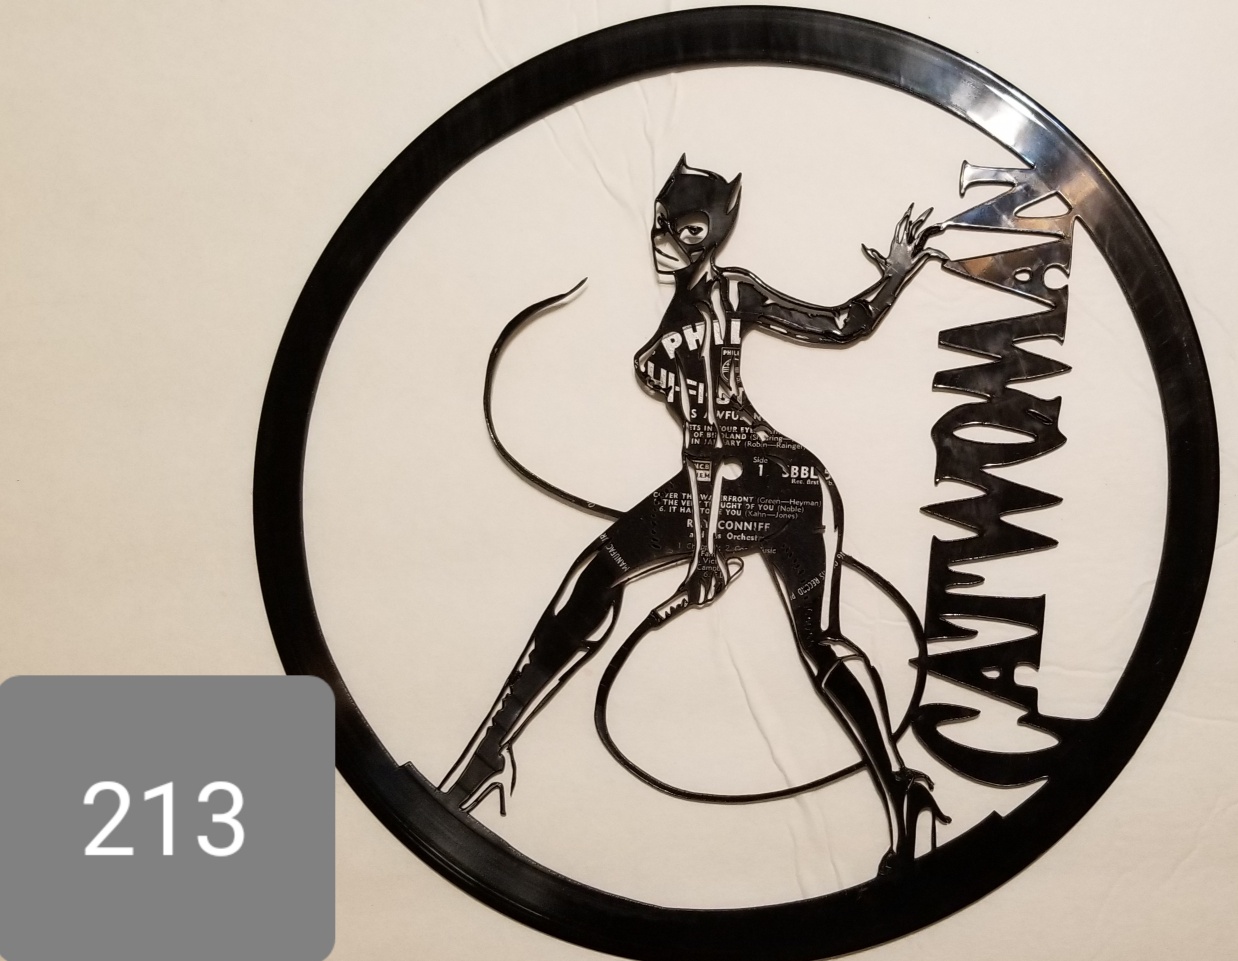 0213 R - CatWoman